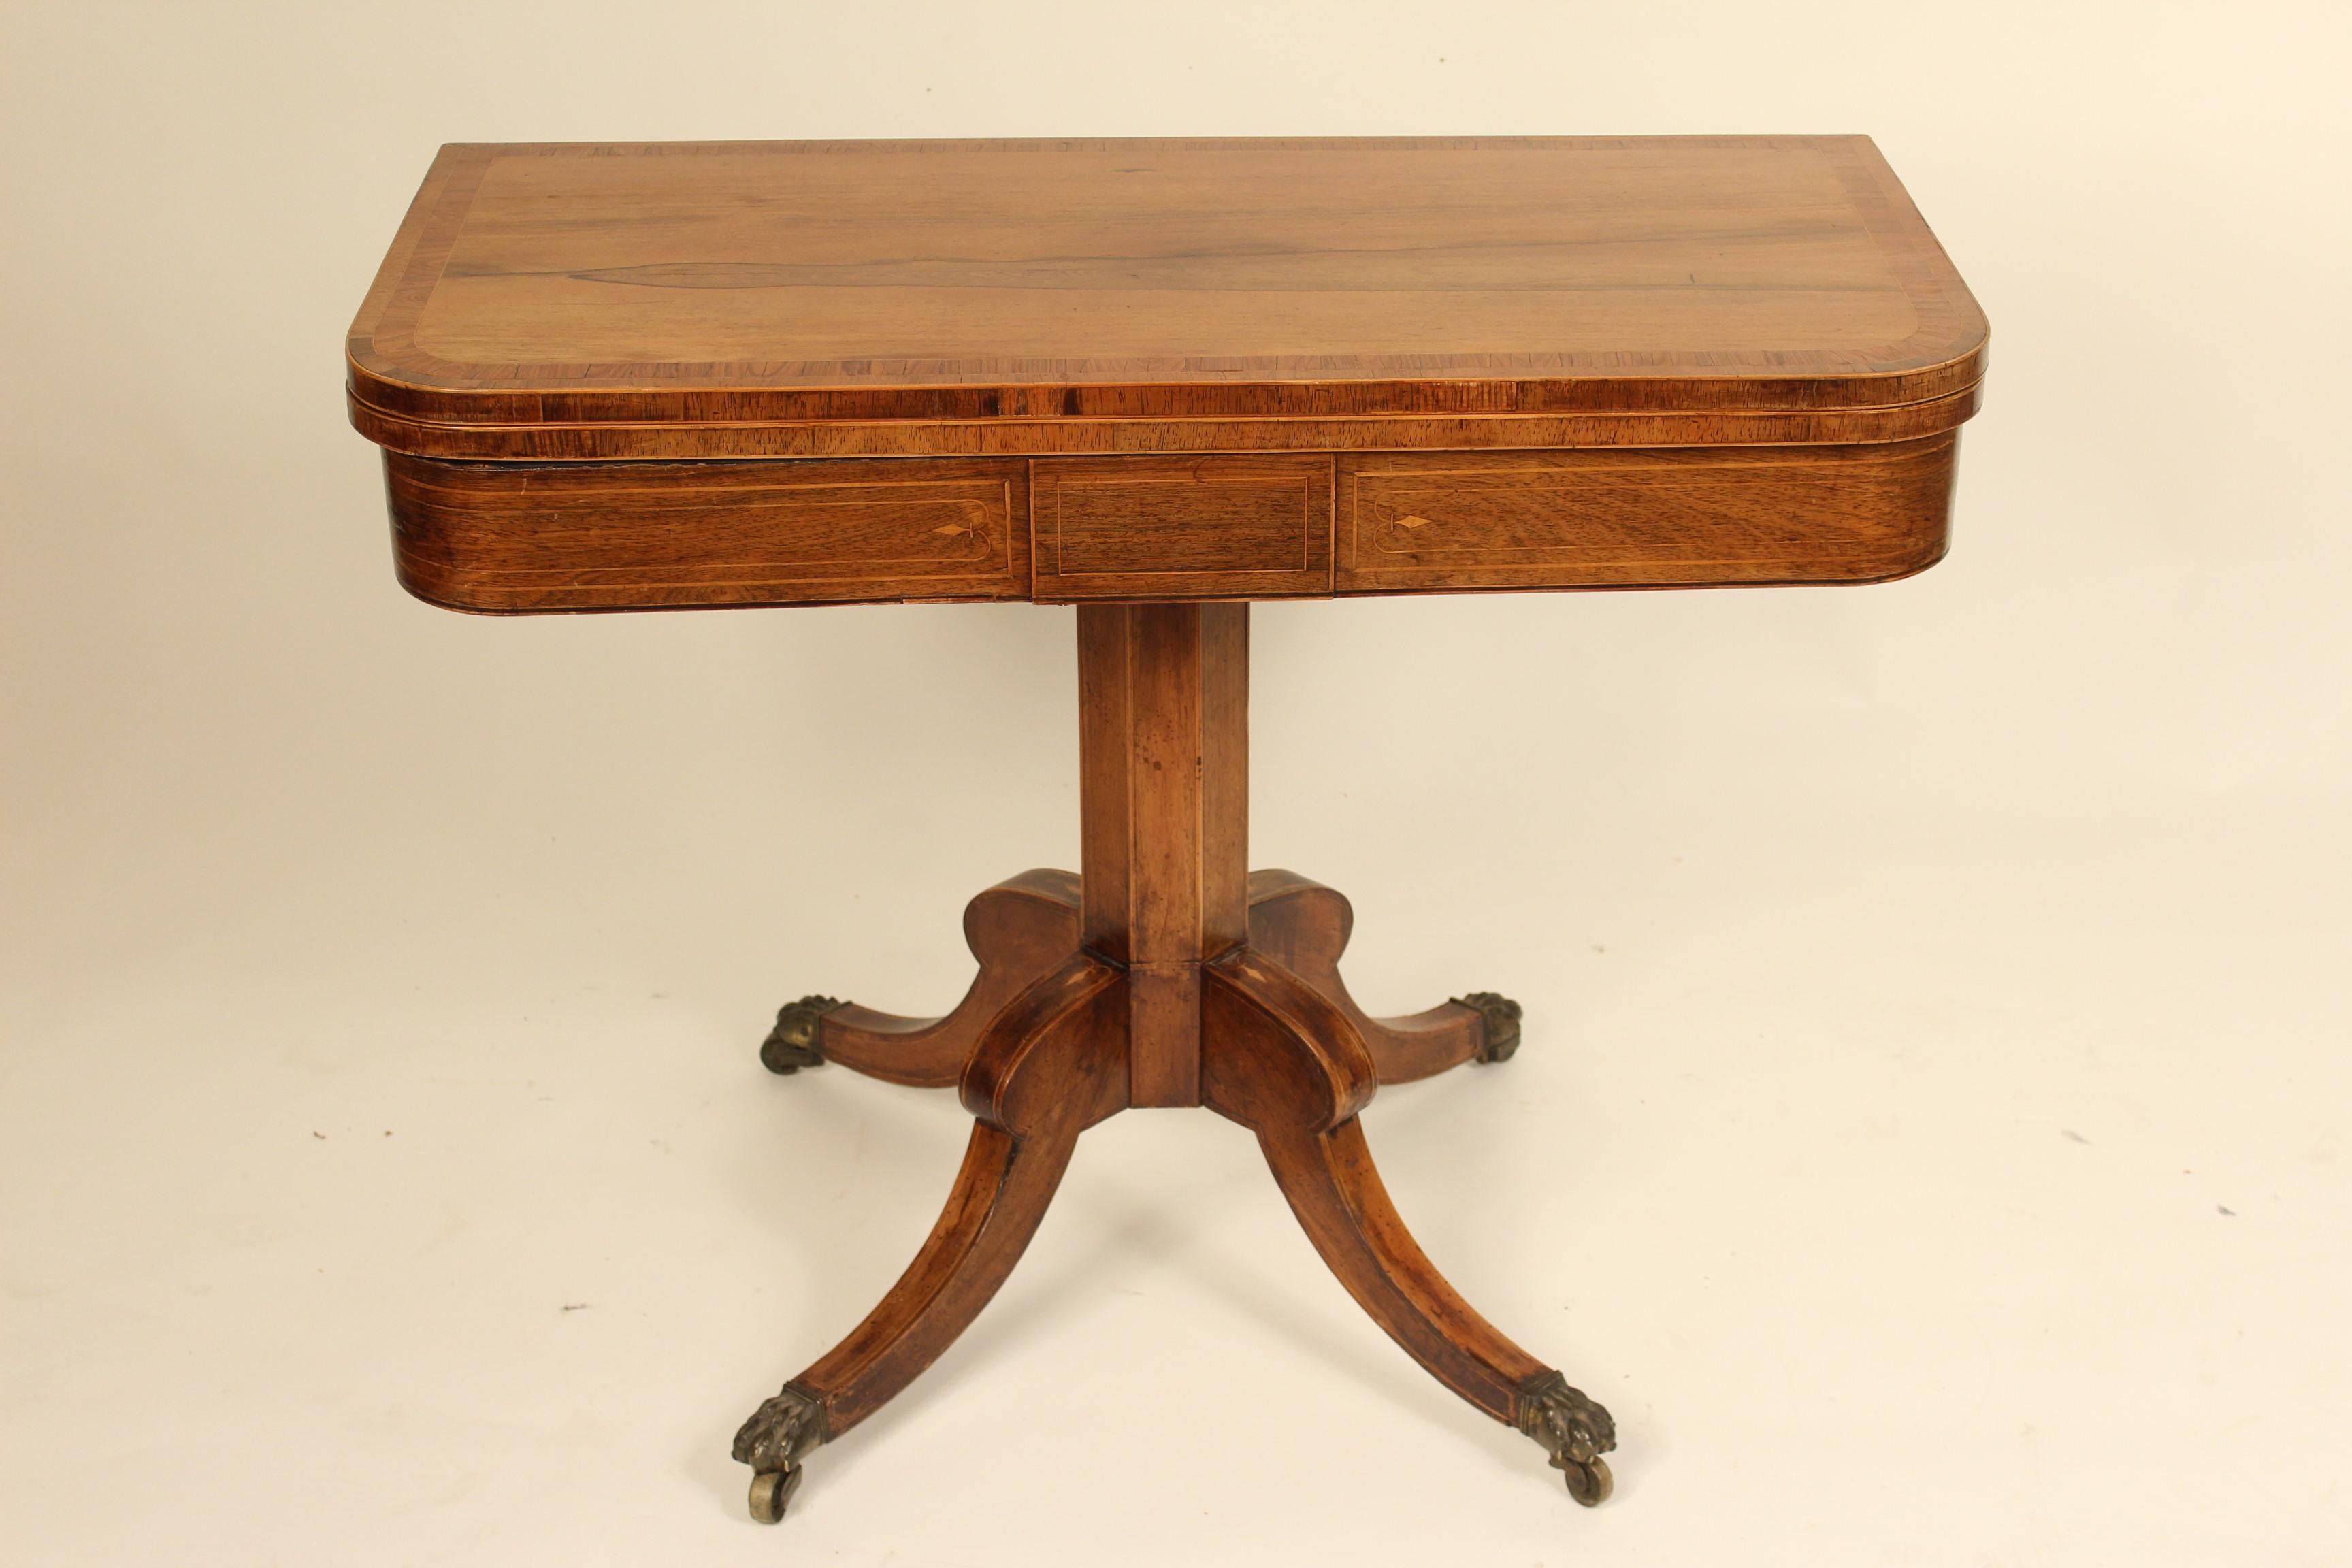 English Regency D-shaped rosewood games table, early 19th century. The depth of the top is 17.5